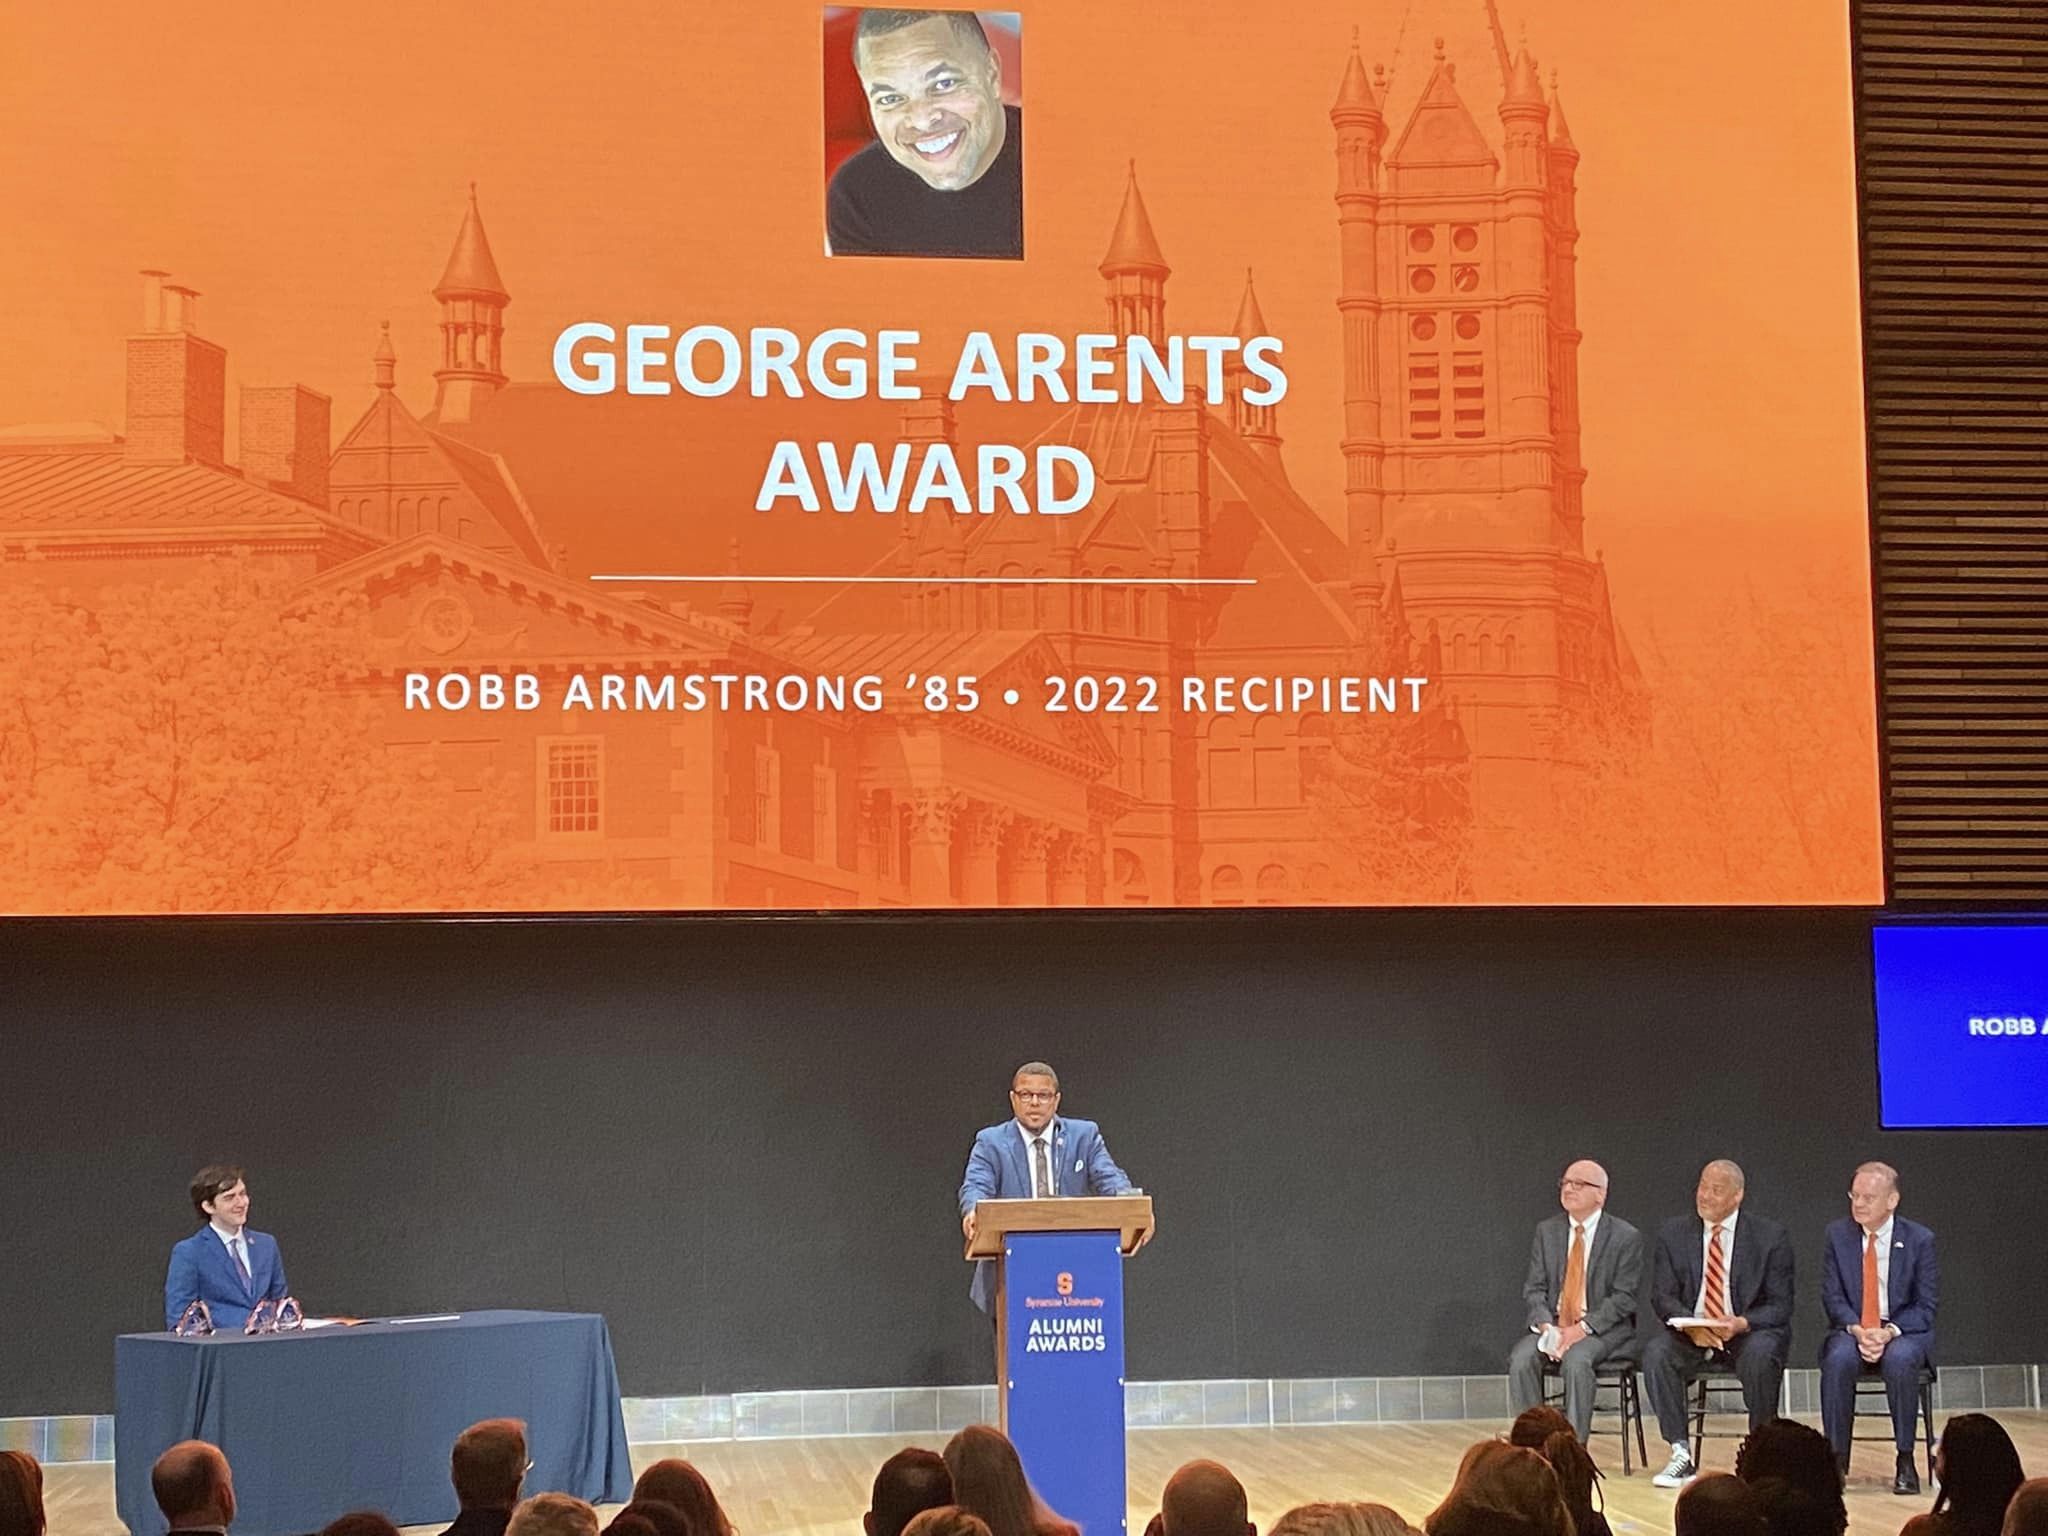 Robb Armstrong Accepting His Arents Award